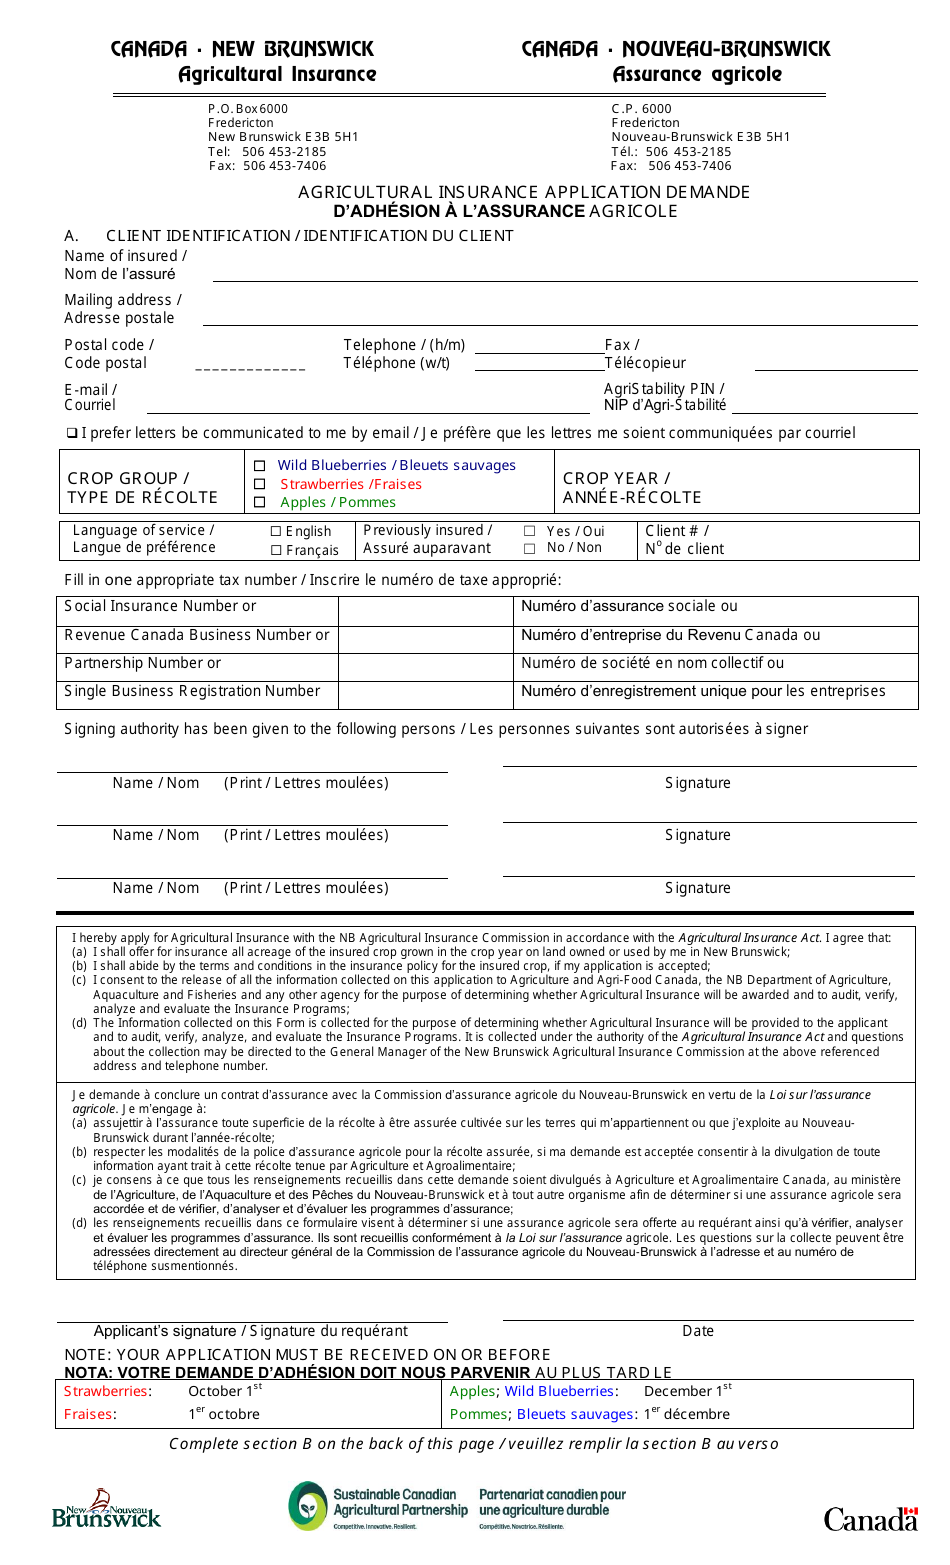 Agricultural Insurance Application - Wild Blueberries / Strawberries / Apples - New Brunswick, Canada (English / French), Page 1